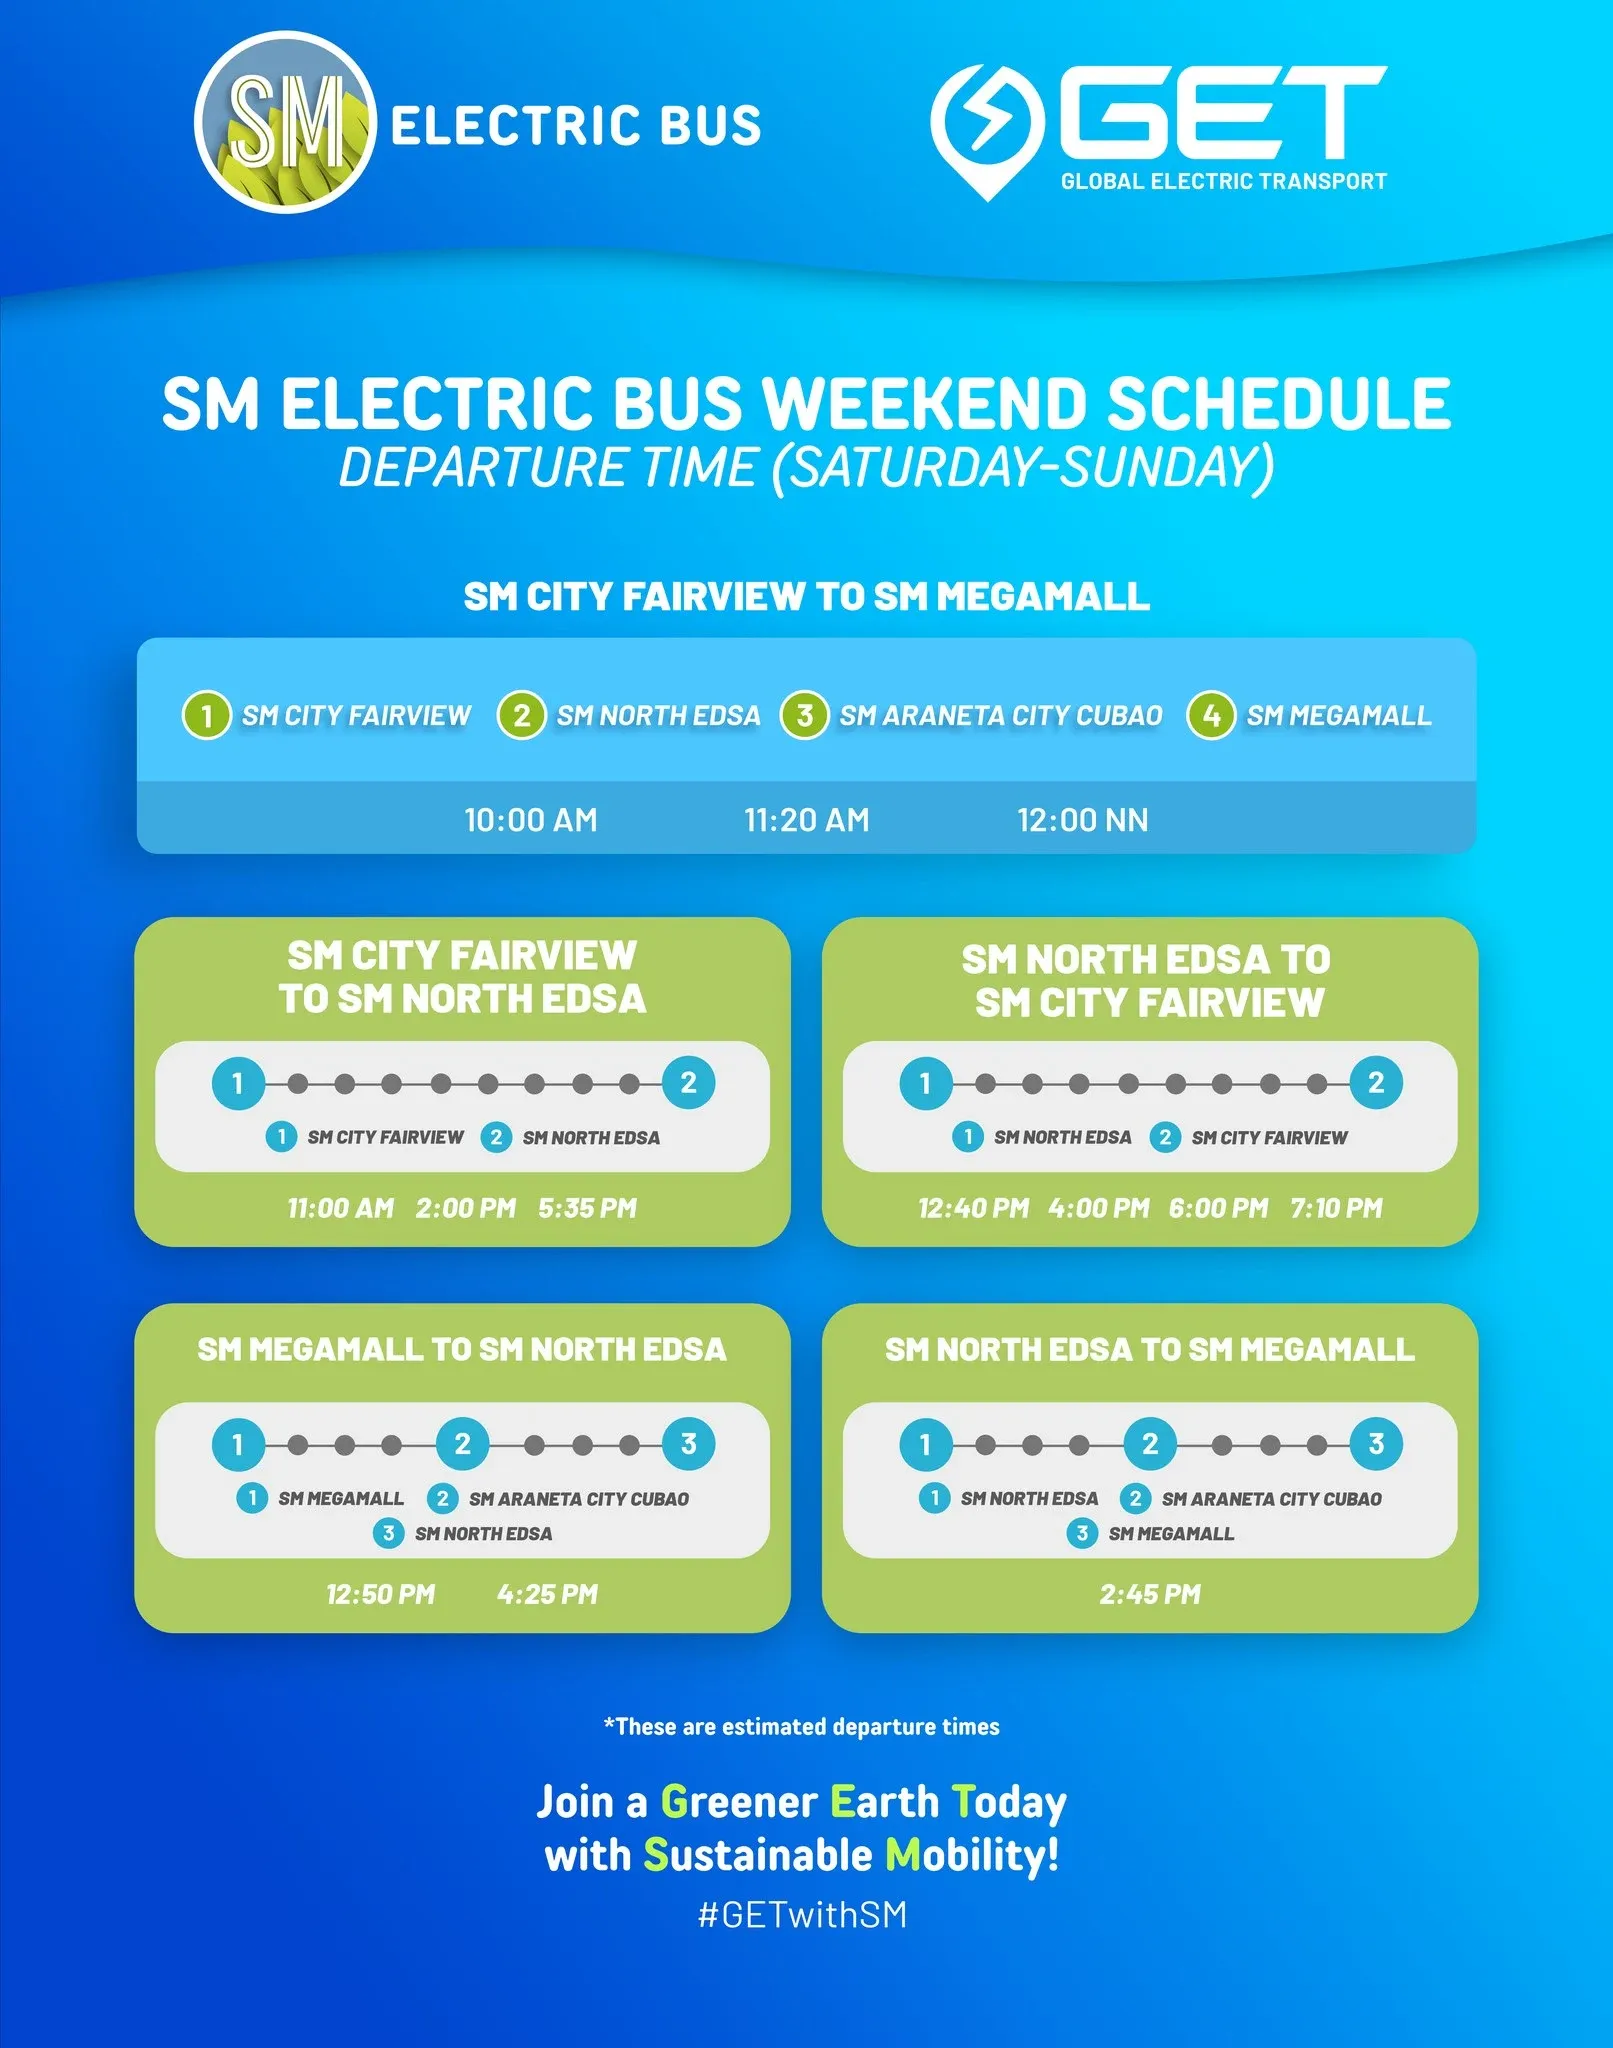 Electric Bus Guide in Metro Manila: Routes, Schedule, Commuter Tips